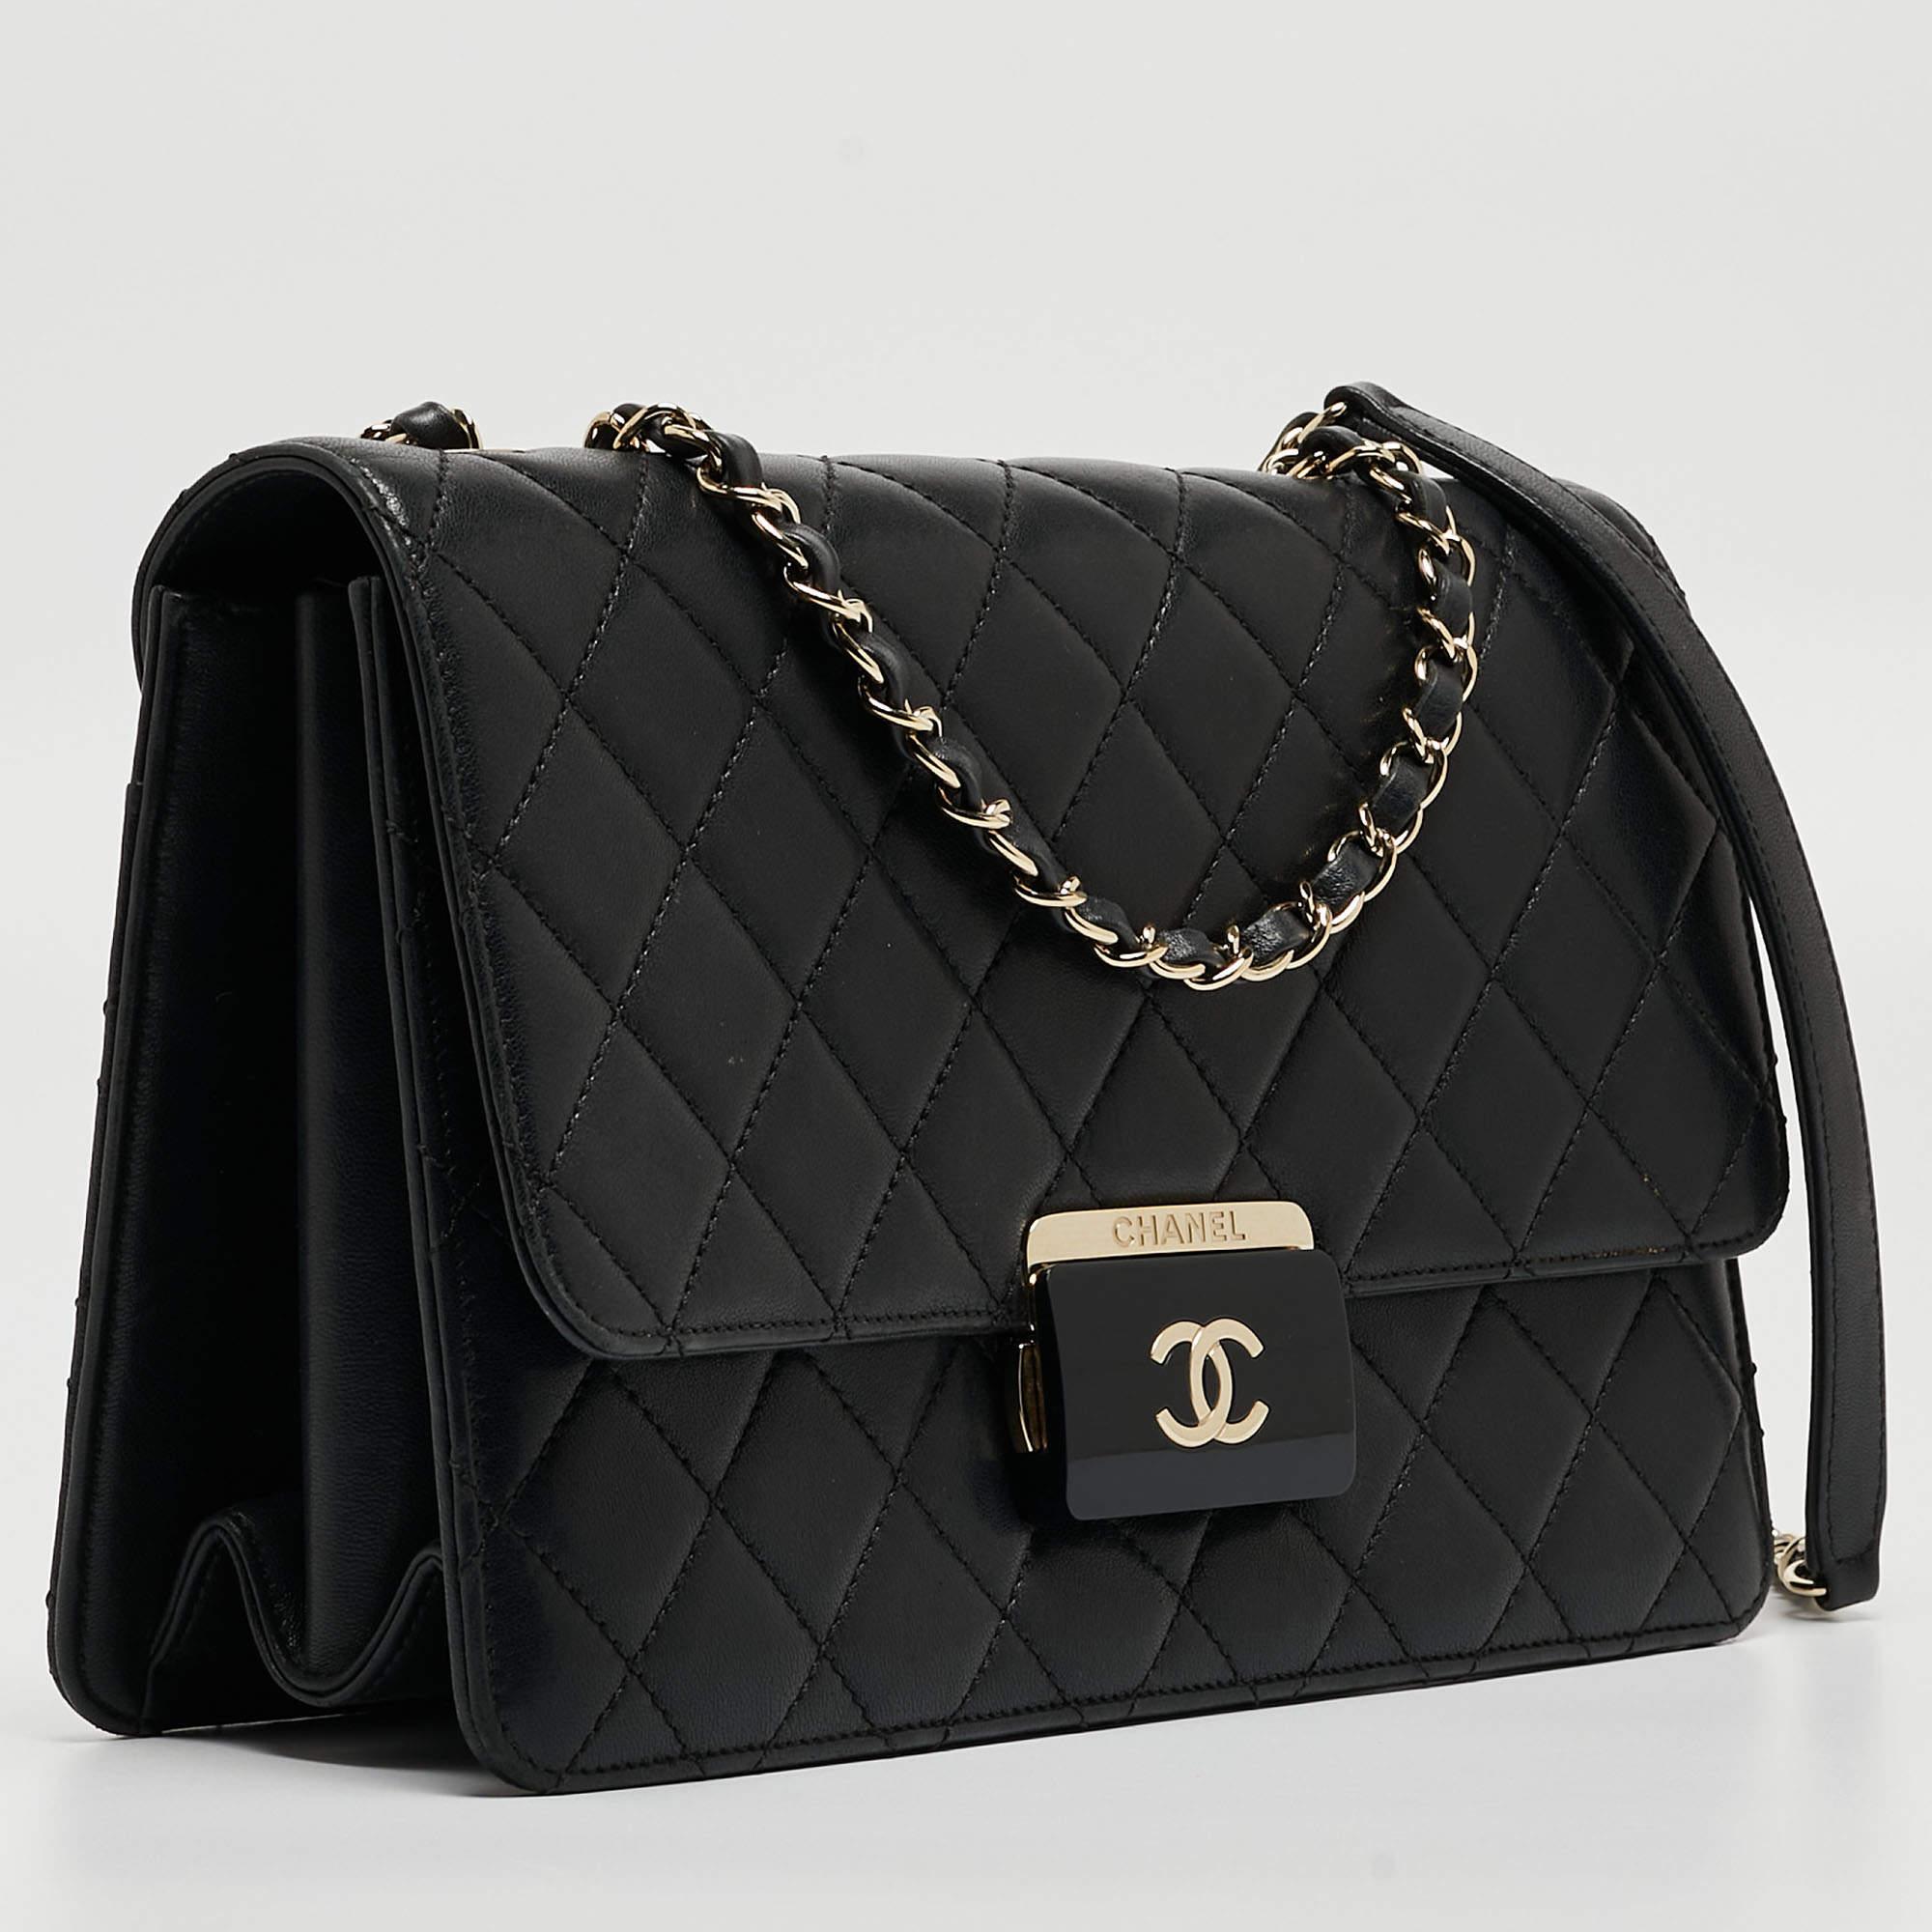 Chanel Black Quilted Leather Beauty Lock Flap Bag 14